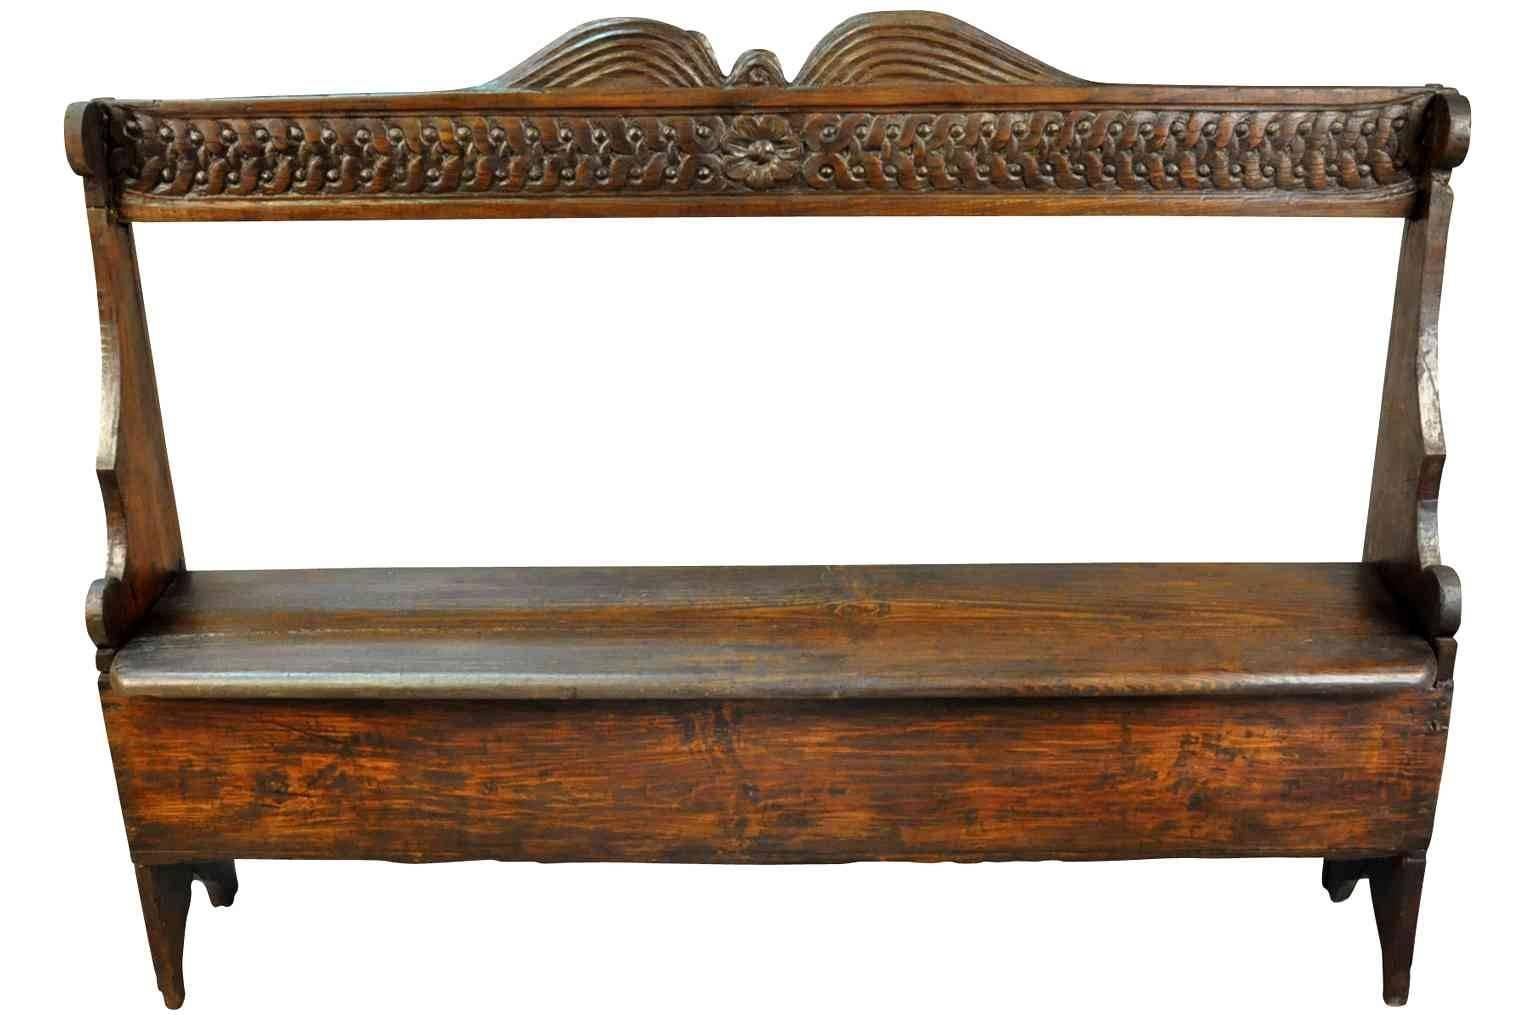 A charming early 19th century settle bench from Portugal. The seat lifts to expose a storage area. Wonderful for a keeping room or mud room.